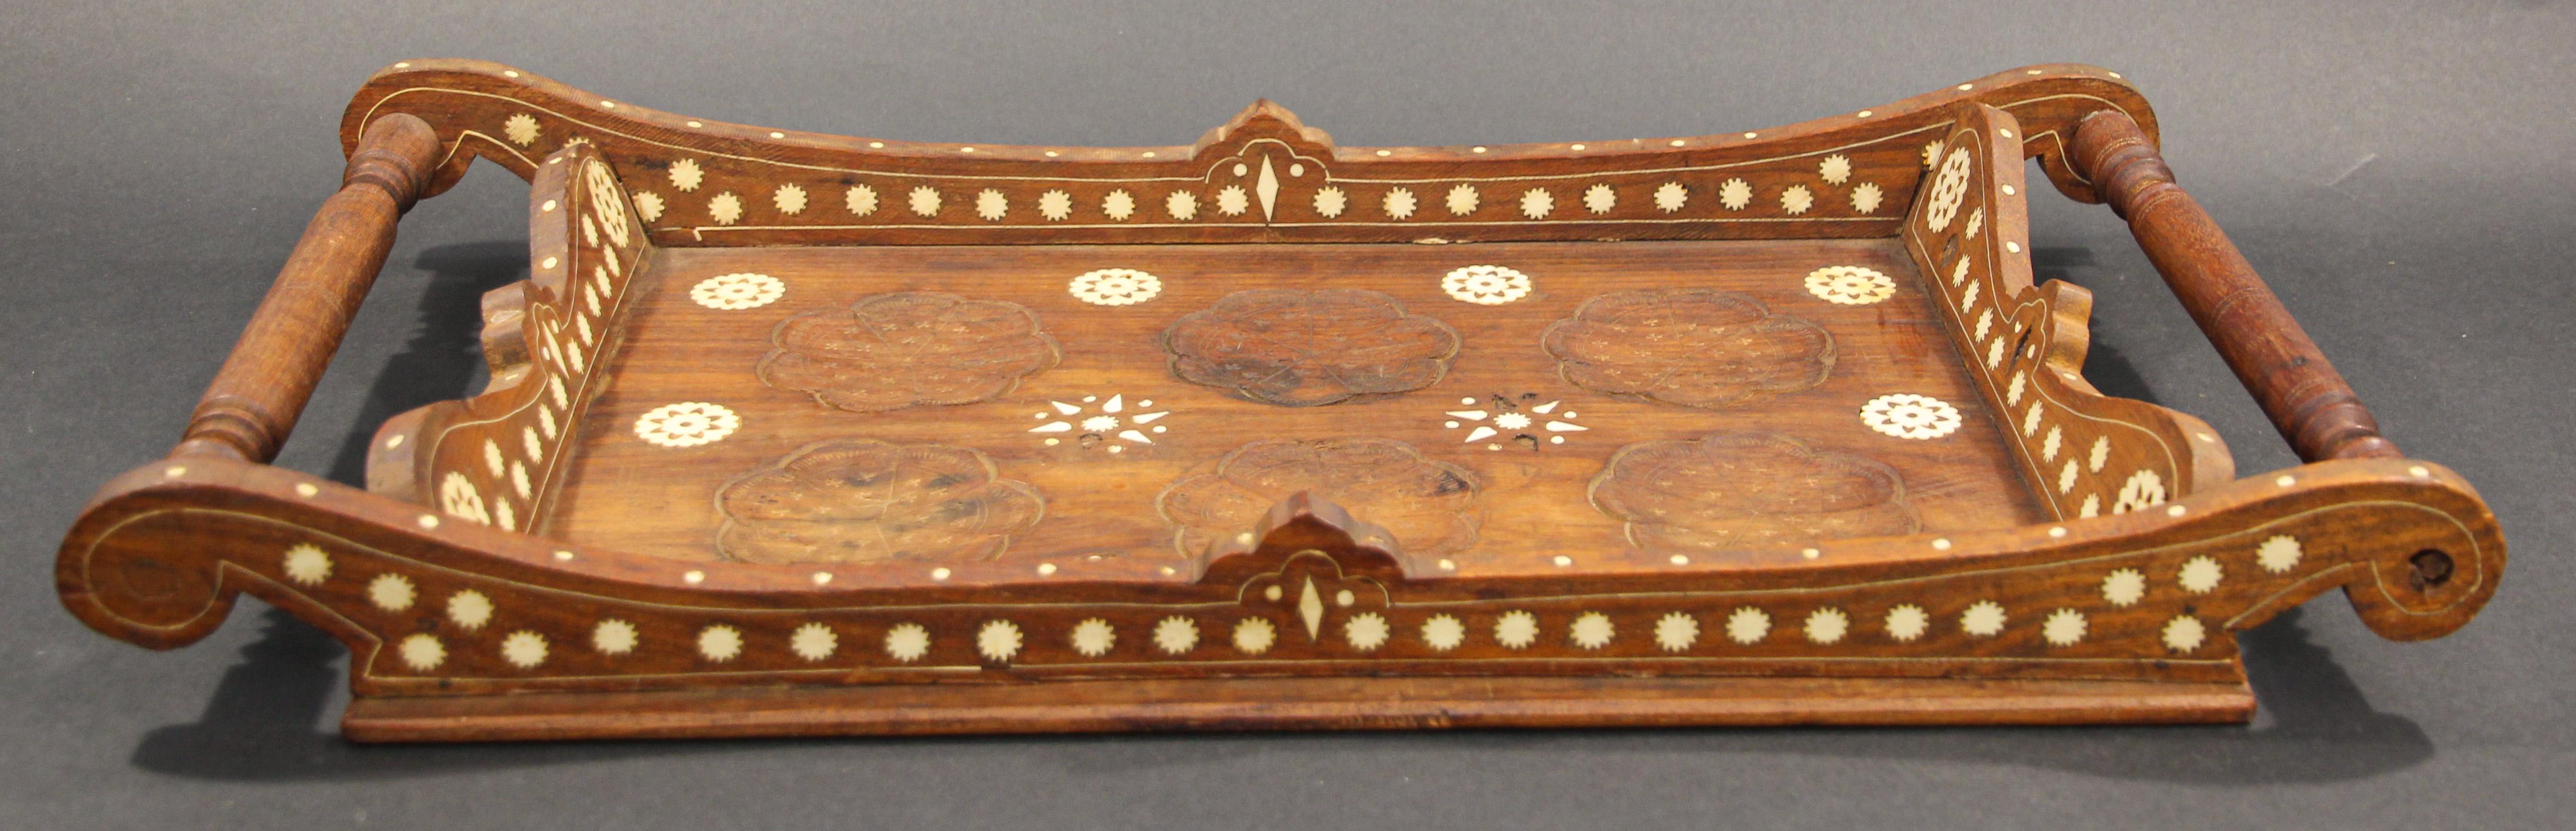 Vintage Large Teak Wood with Bone inlay Made in India 9